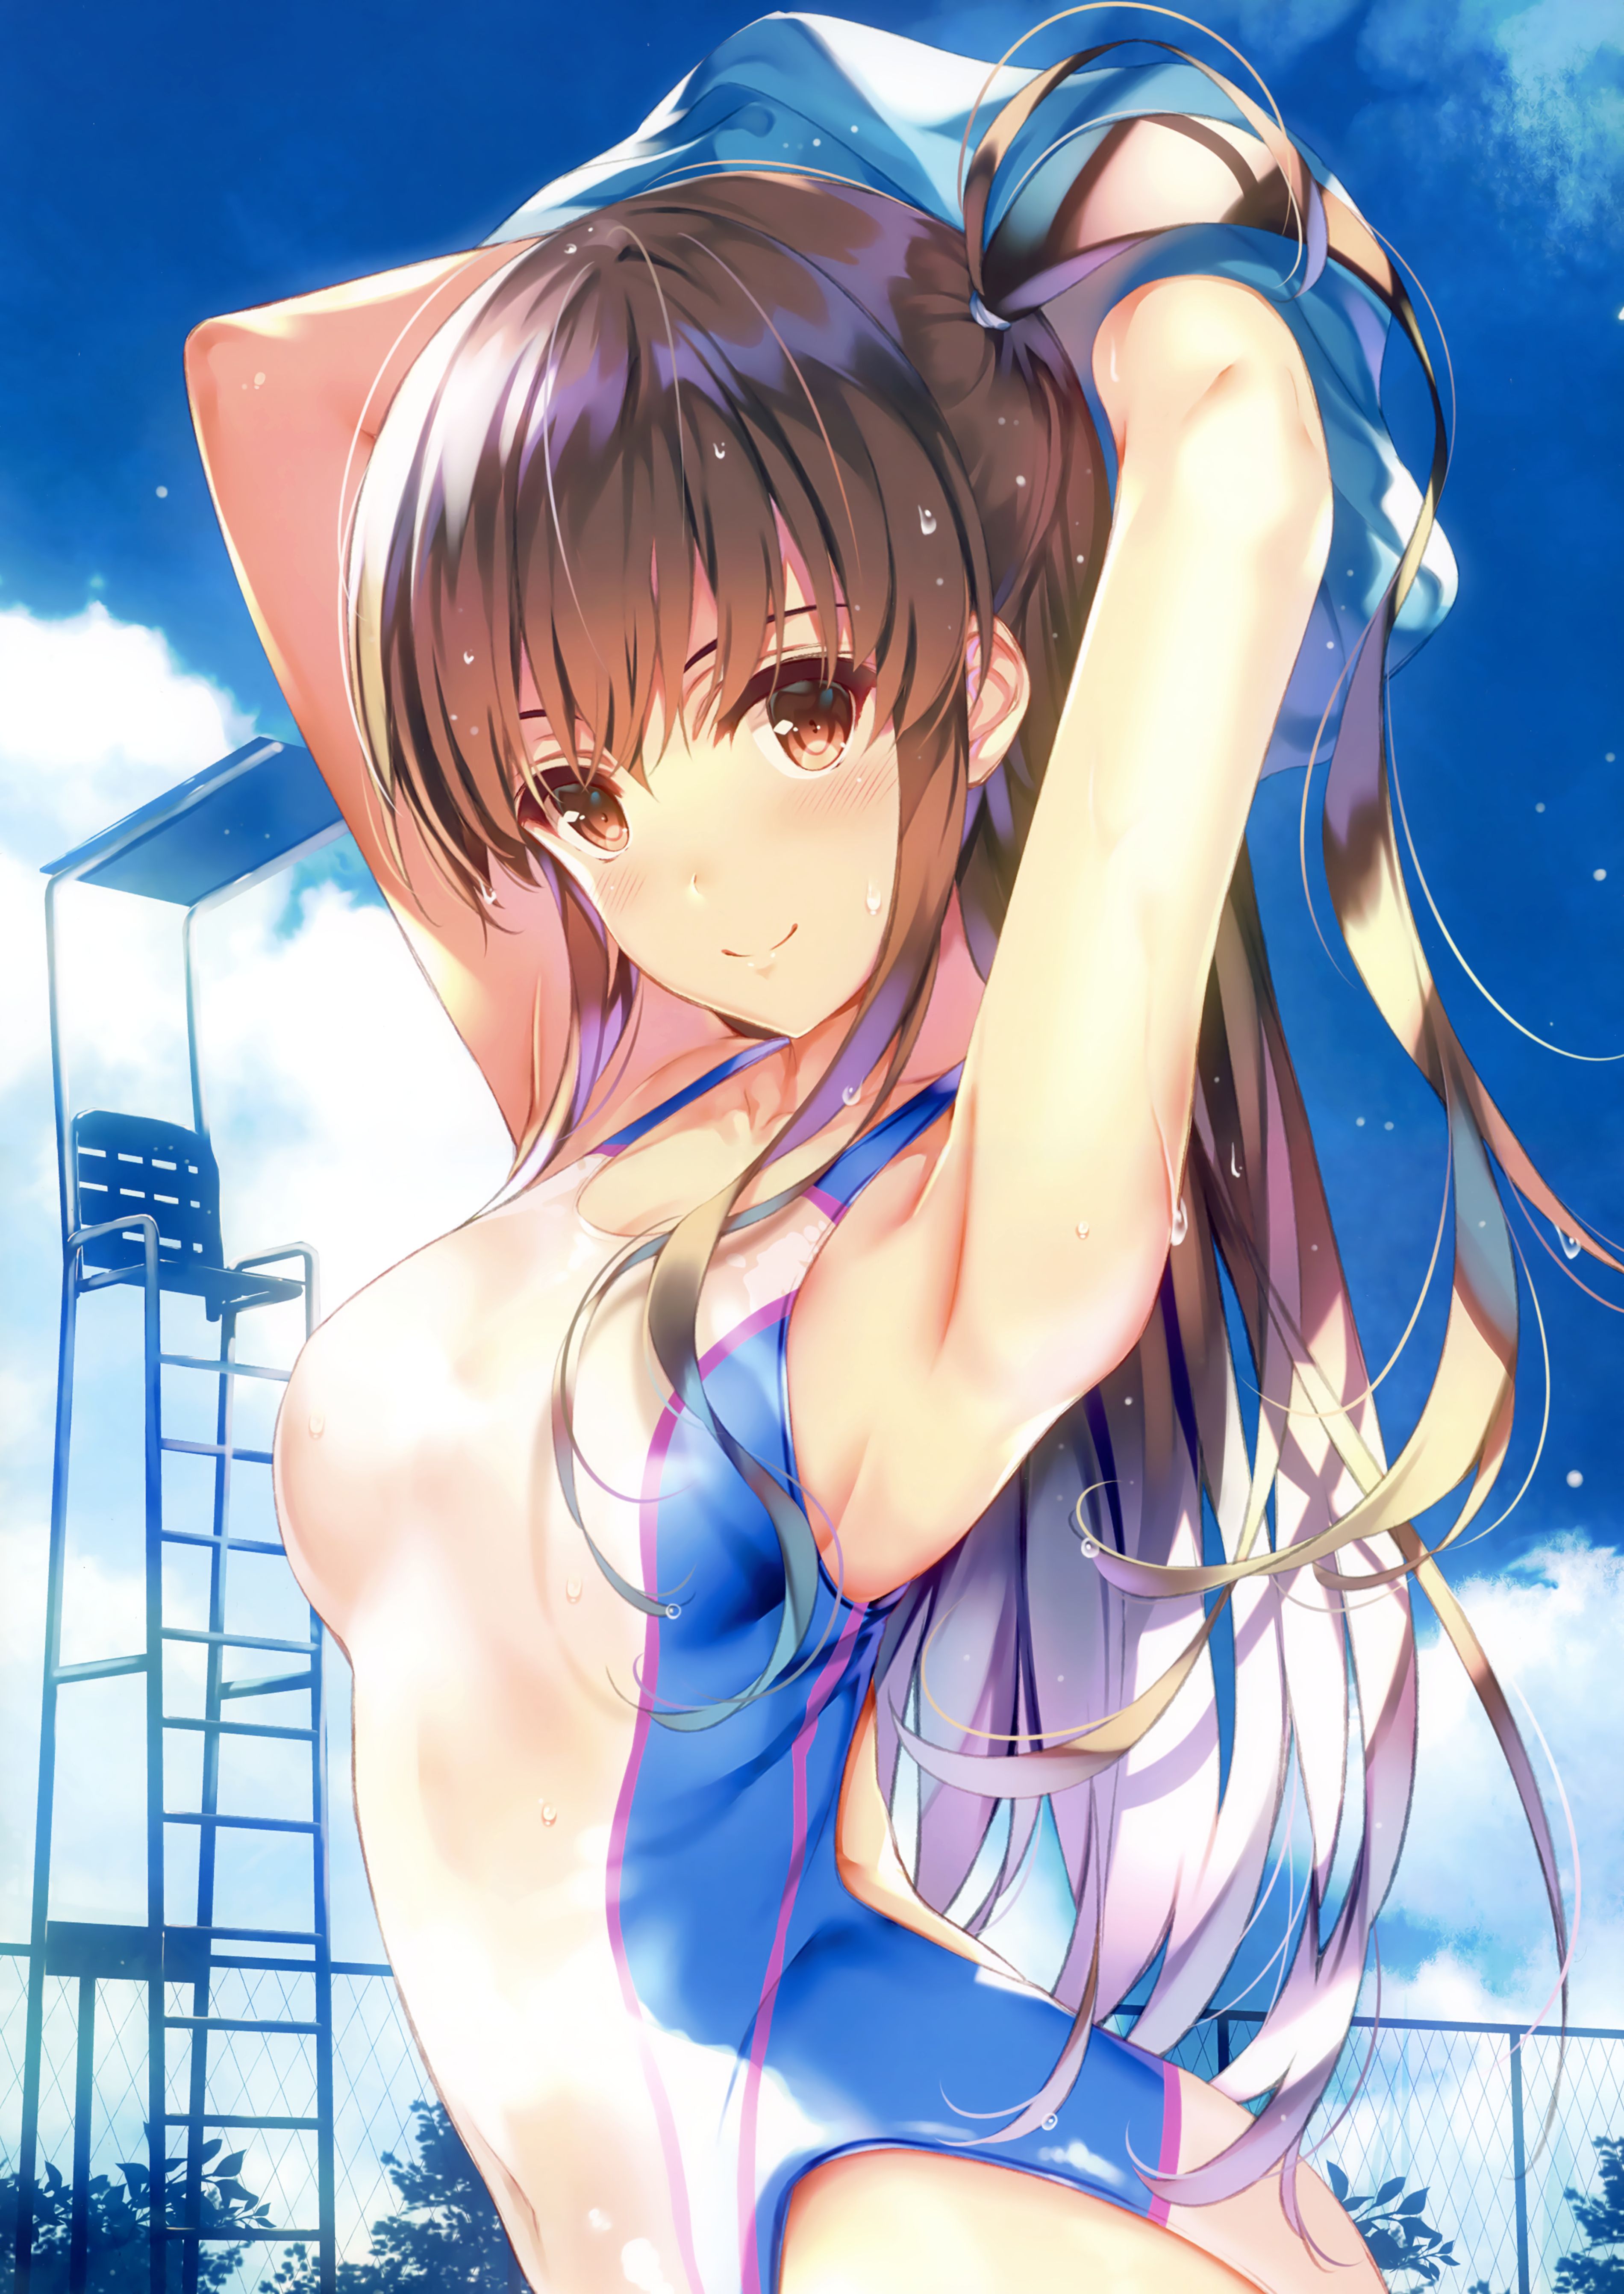 Erotic anime summary Erotic image collection of wet transparent beauties and beautiful girls that are transparent variously [50 sheets] 34